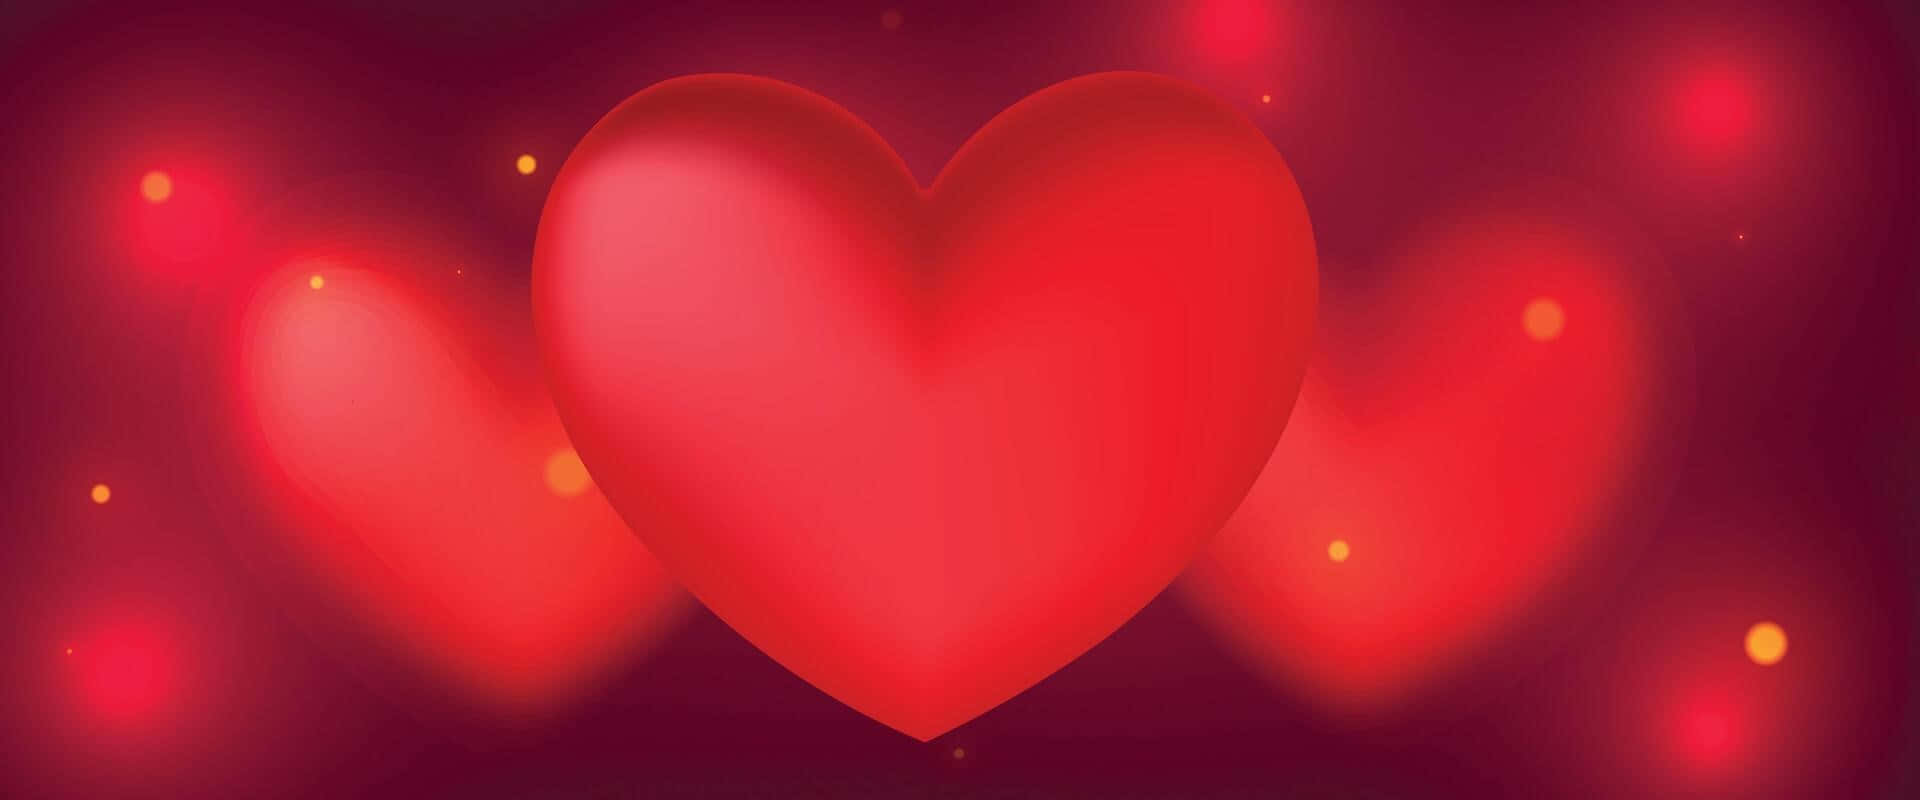 Abstract Blurry Red Heart Background Wallpaper